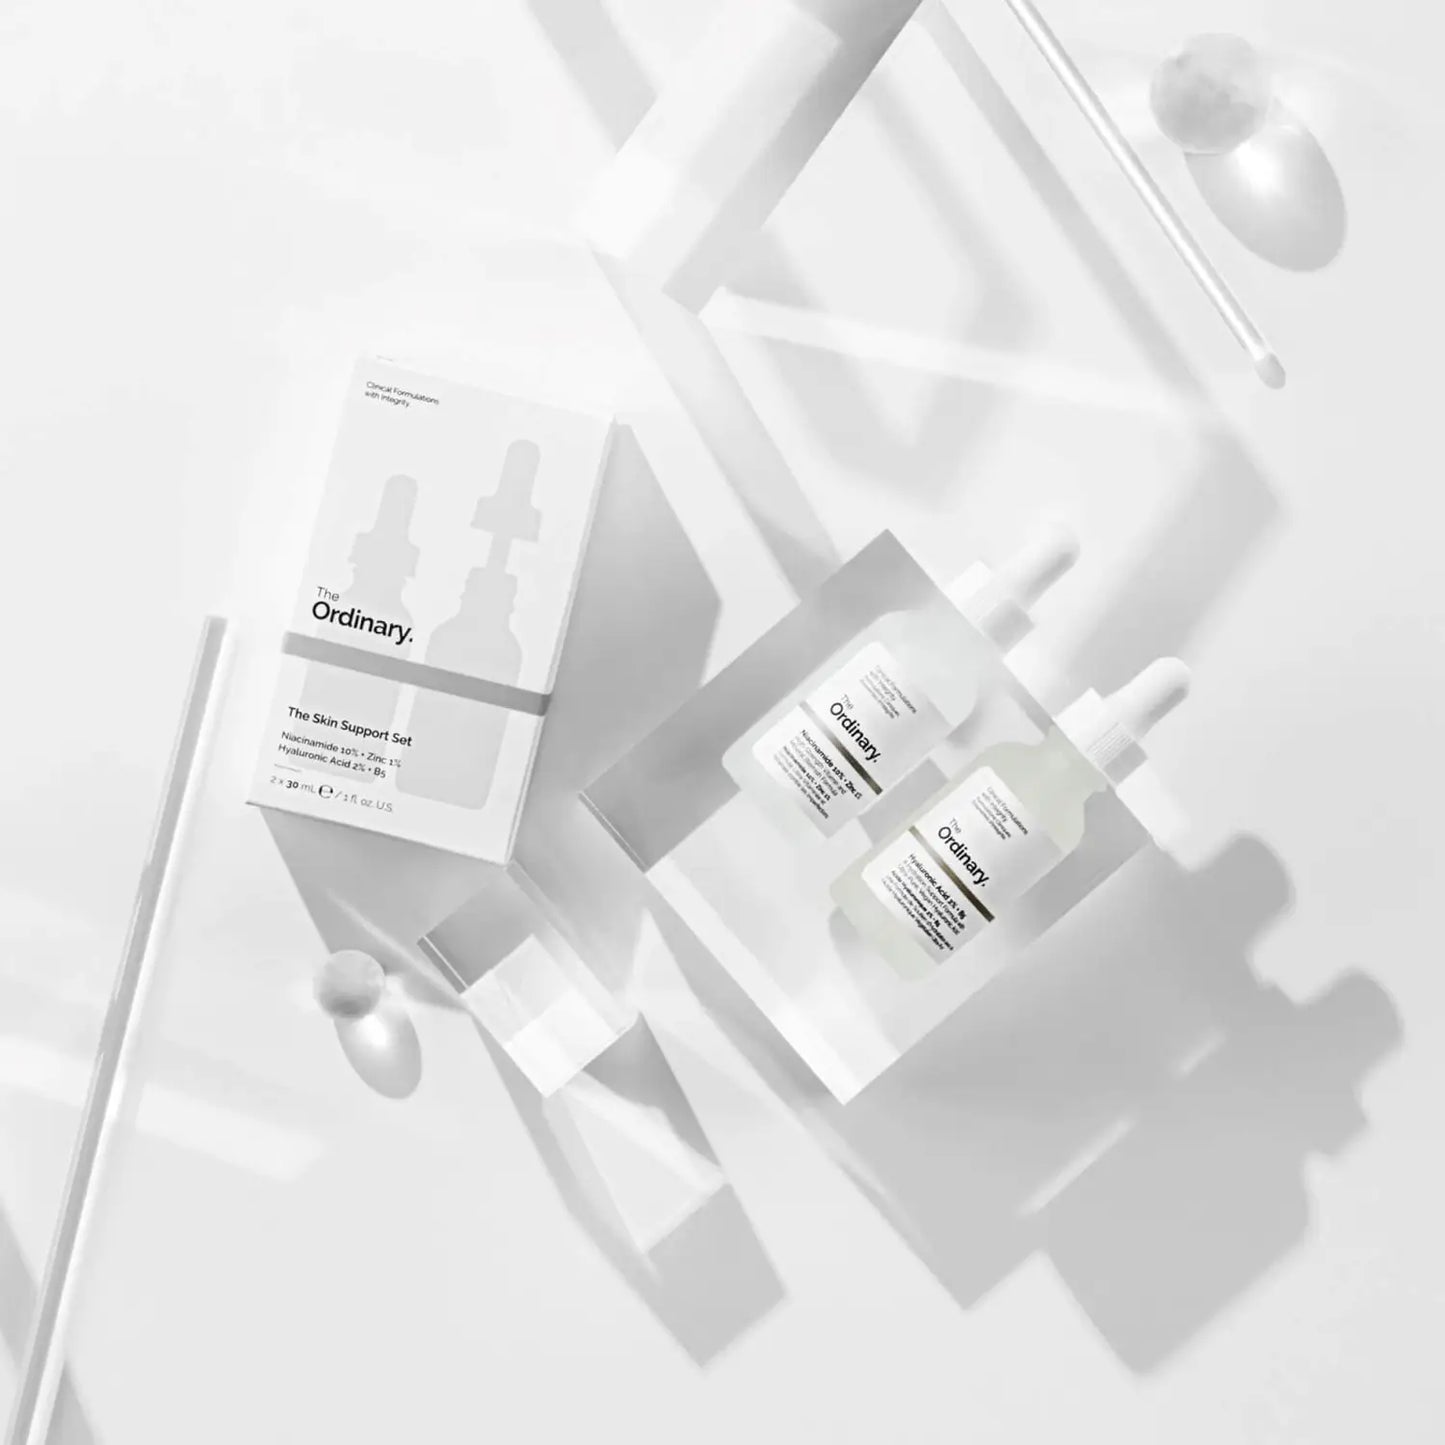 THE ORDINARY | THE SKIN SUPPORT SET